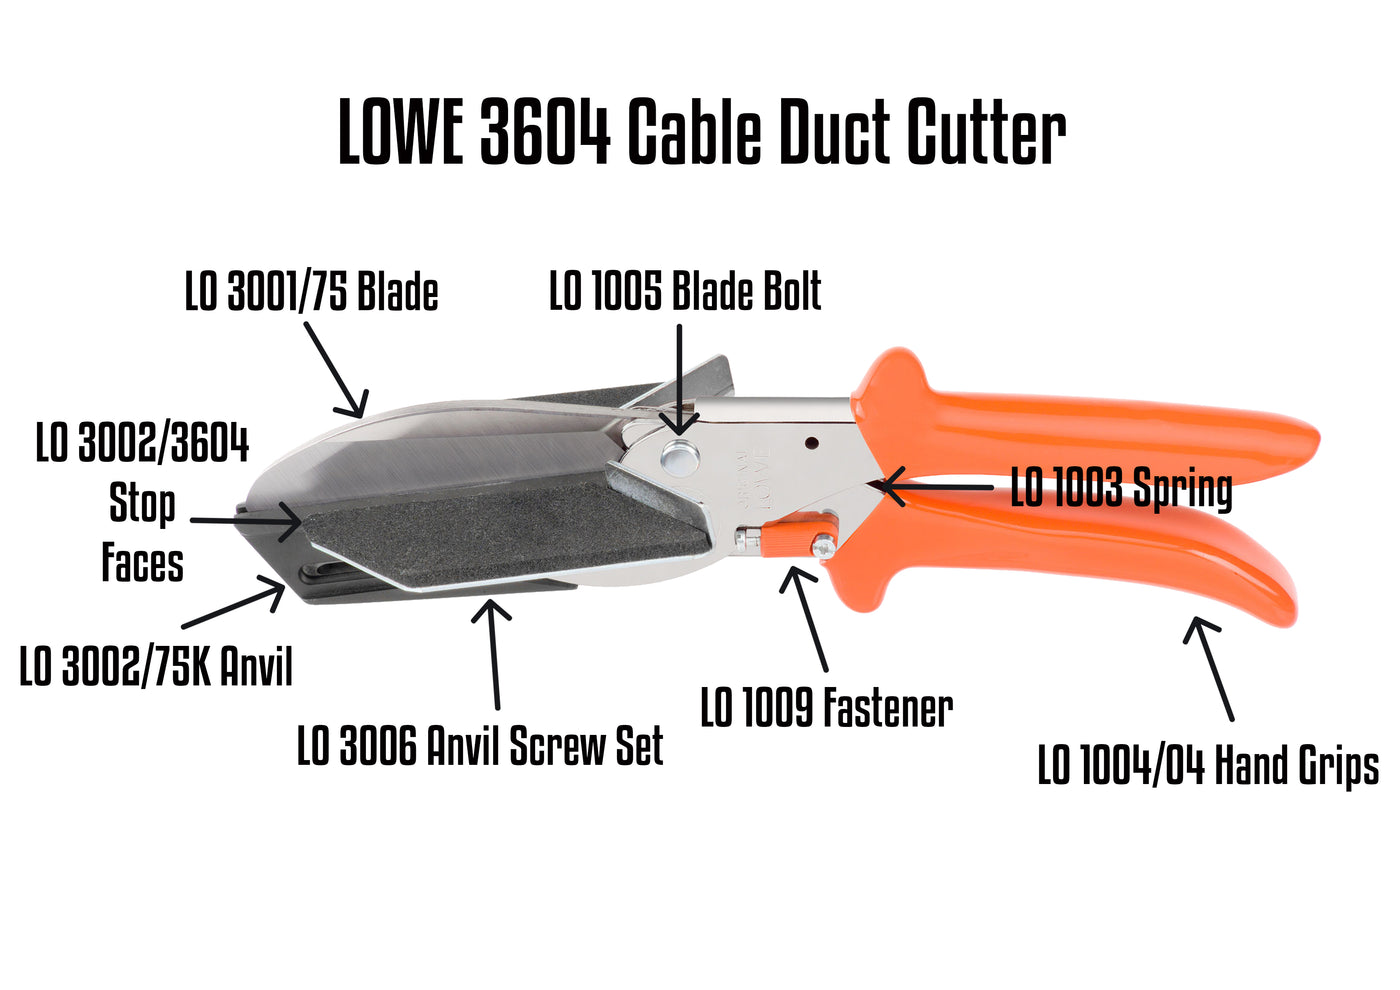 LO 3604 Cable Duct Cutter